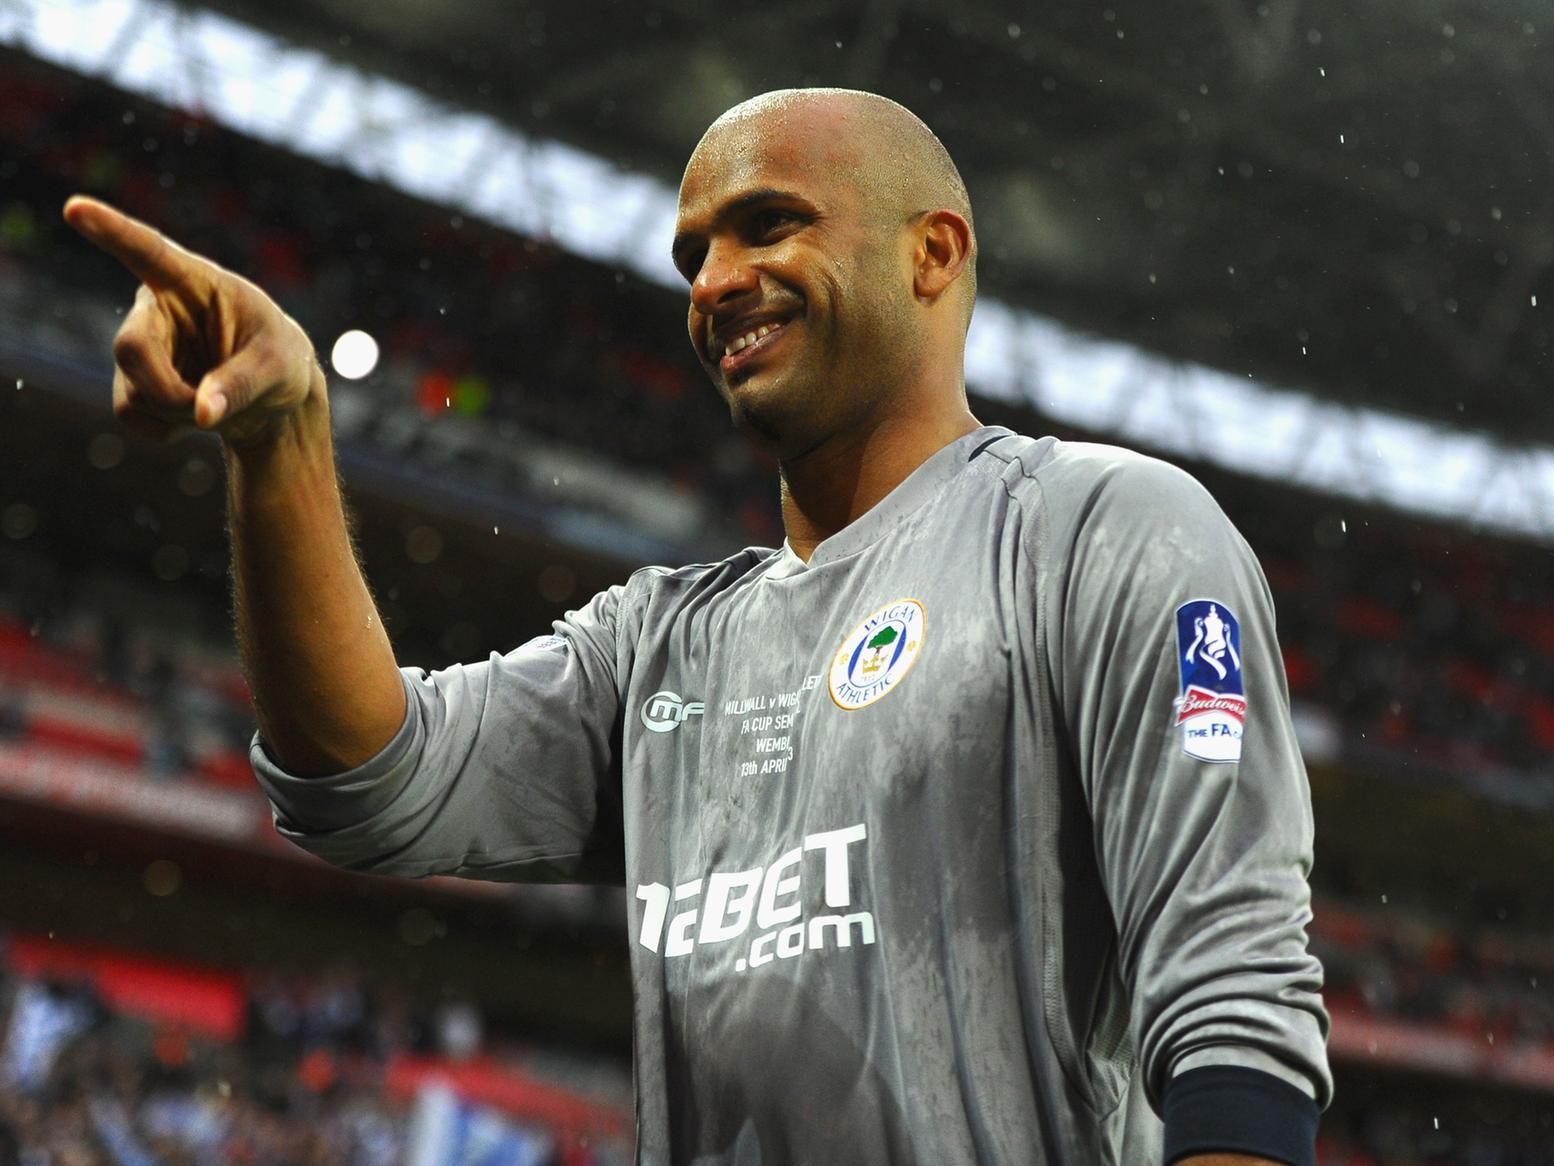 GOALKEEPER: ALIALHABSI- Arrived at the DW initially on a 12-month loan from Bolton in 2010, soon made the No.1 spot his own and the move was made permanent the following summer. Undisputed first choice for majority of his five-year stay, was on the bench for the FA Cup final after playing in the semi-finalwin overMillwall.